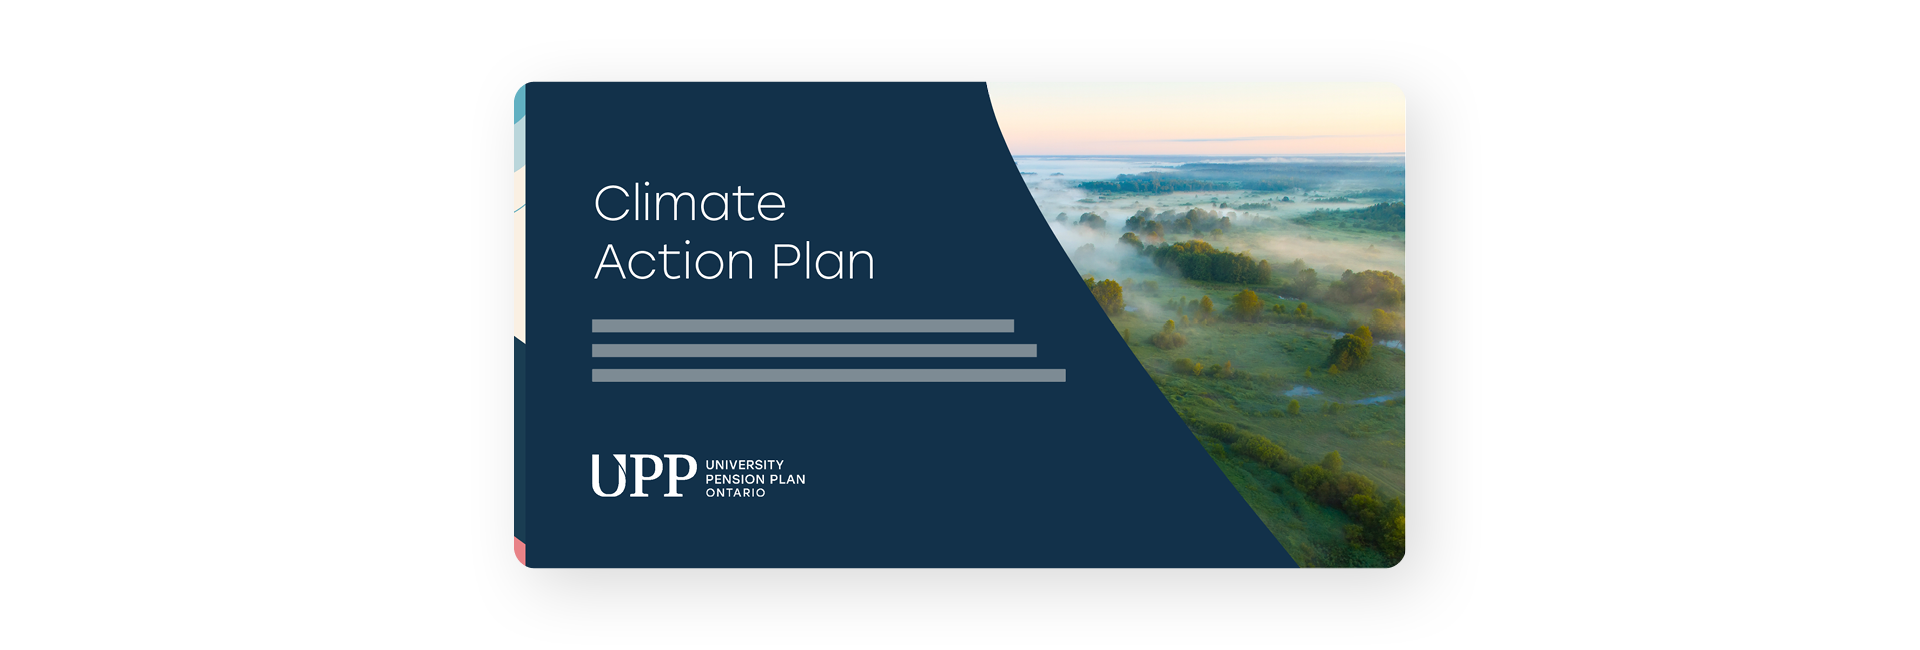 The cover of University Pension Plan's Climate Action Plan.